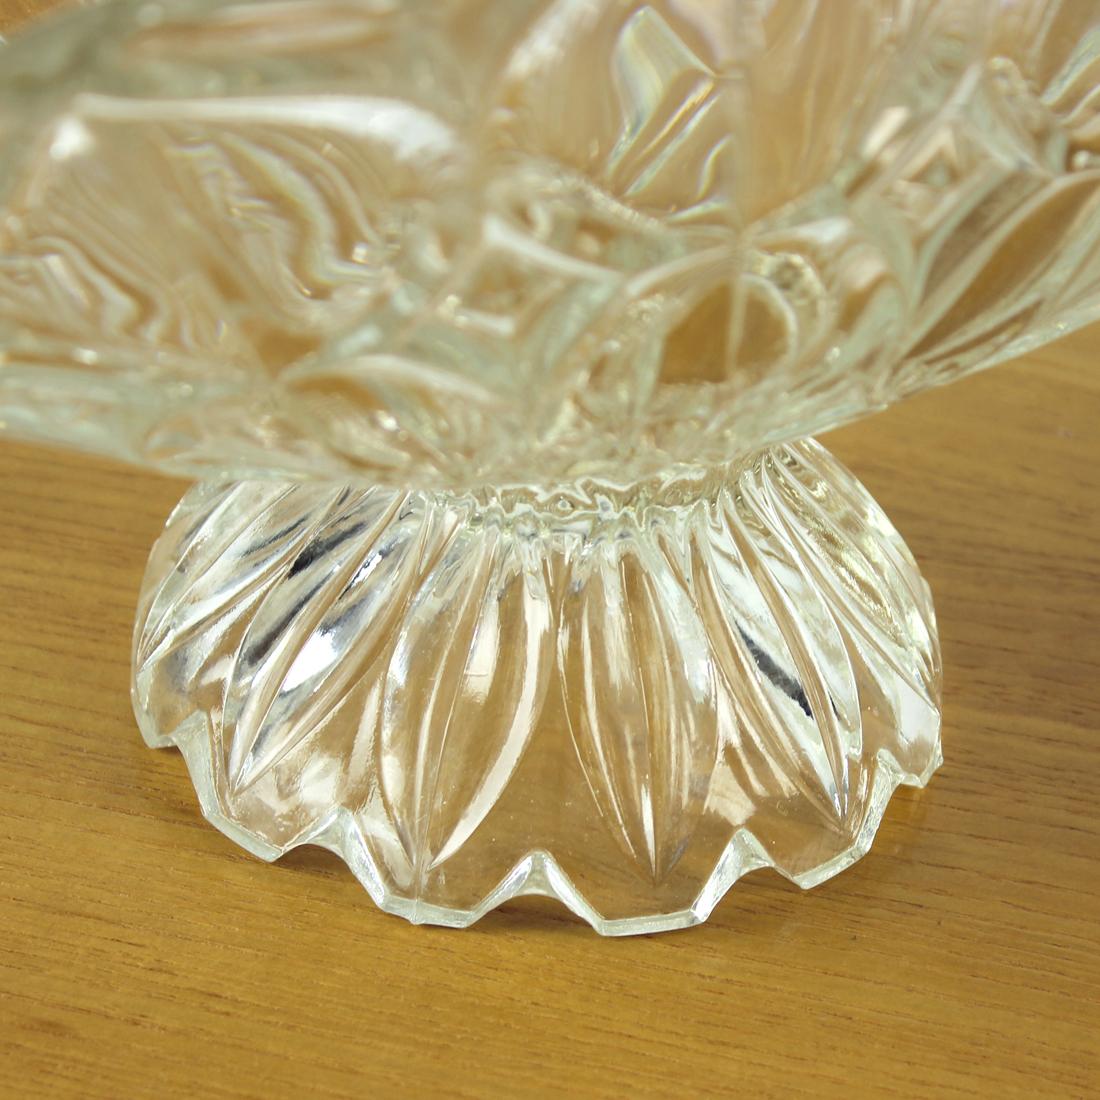 Large Pressed Glass Bowl, Tulip Collection Hermanowa Hut, 1957 For Sale 2